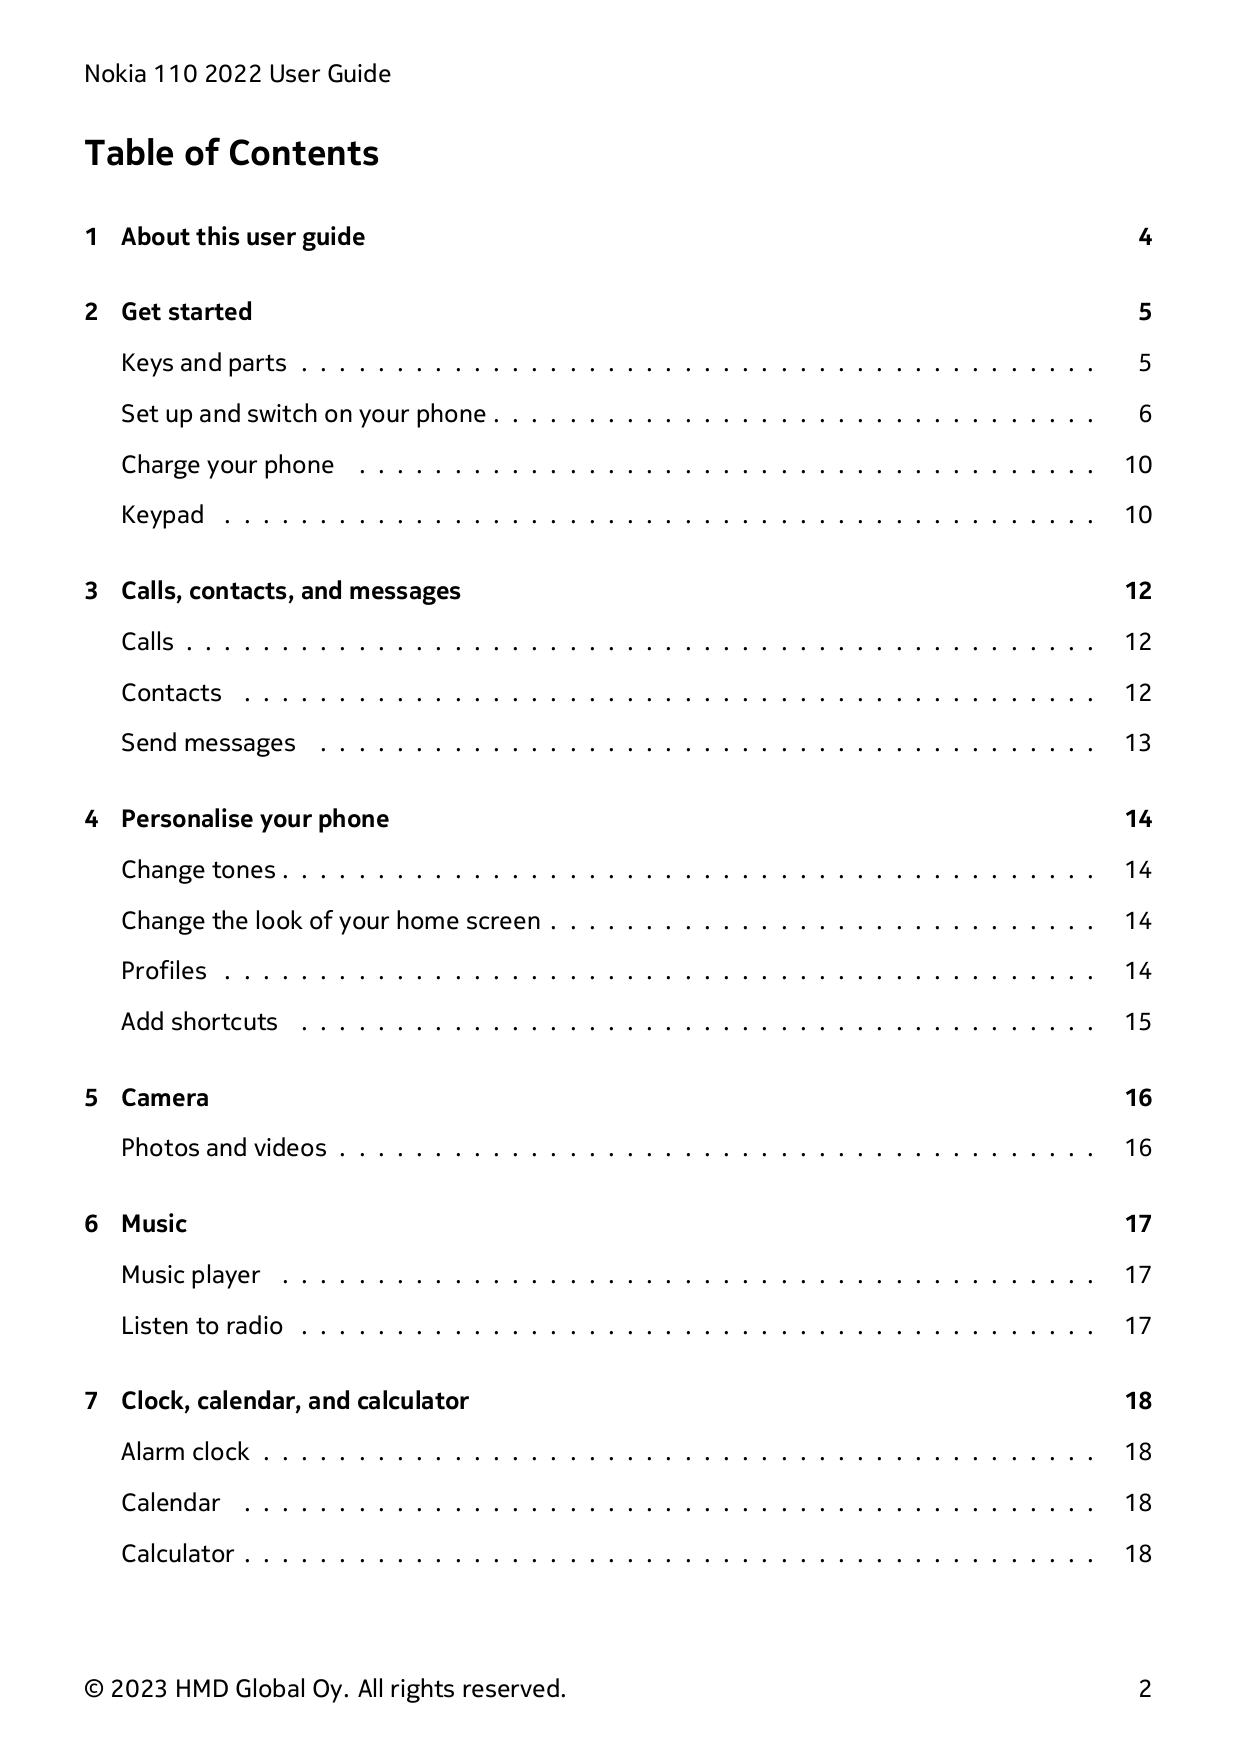 Nokia 110 2022 User GuideTable of Contents1 About this user guide42 Get started5Keys and parts . . . . . . . . . . . . . . . . .